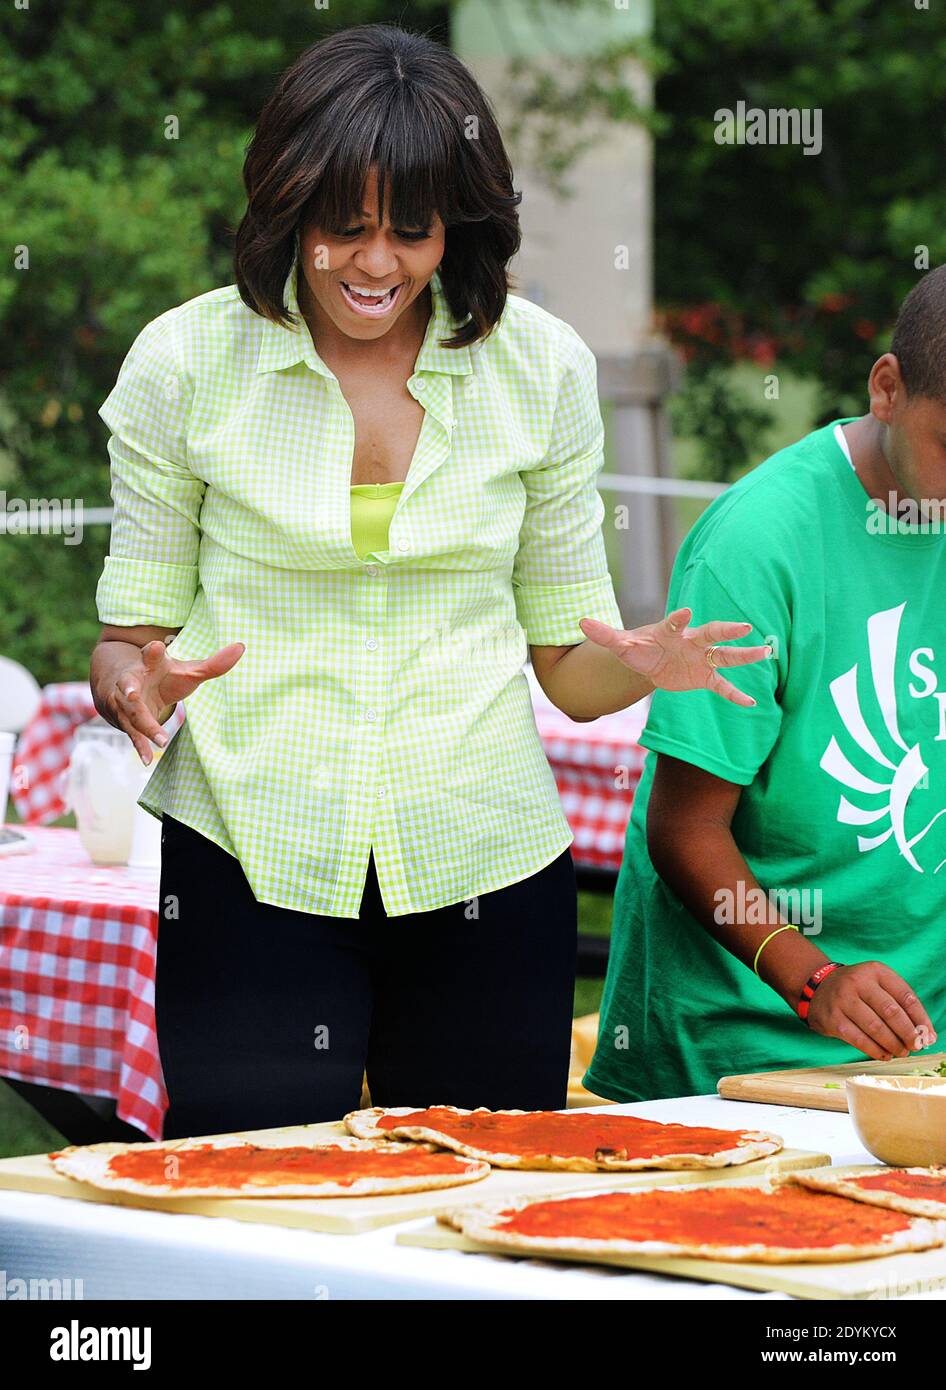 First lady Michelle Obama harvests vegetable from the White House Kitchen Garden's summer crop with children from two New Jersey communities that were affected by Hurricane Sandy and all the children who helped plant the garden in April, at the White House in Washington, DC, USA on May 28, 2013. The first lady was joined by students from Somerville, Massachusettes, Knox County, Tennessee, Milton, Vermont, Washington, DC and Union Beach and Ship Bottom, New Jersey. Photo by Olivier Douliery/ABACAPRESS.COM Stock Photo